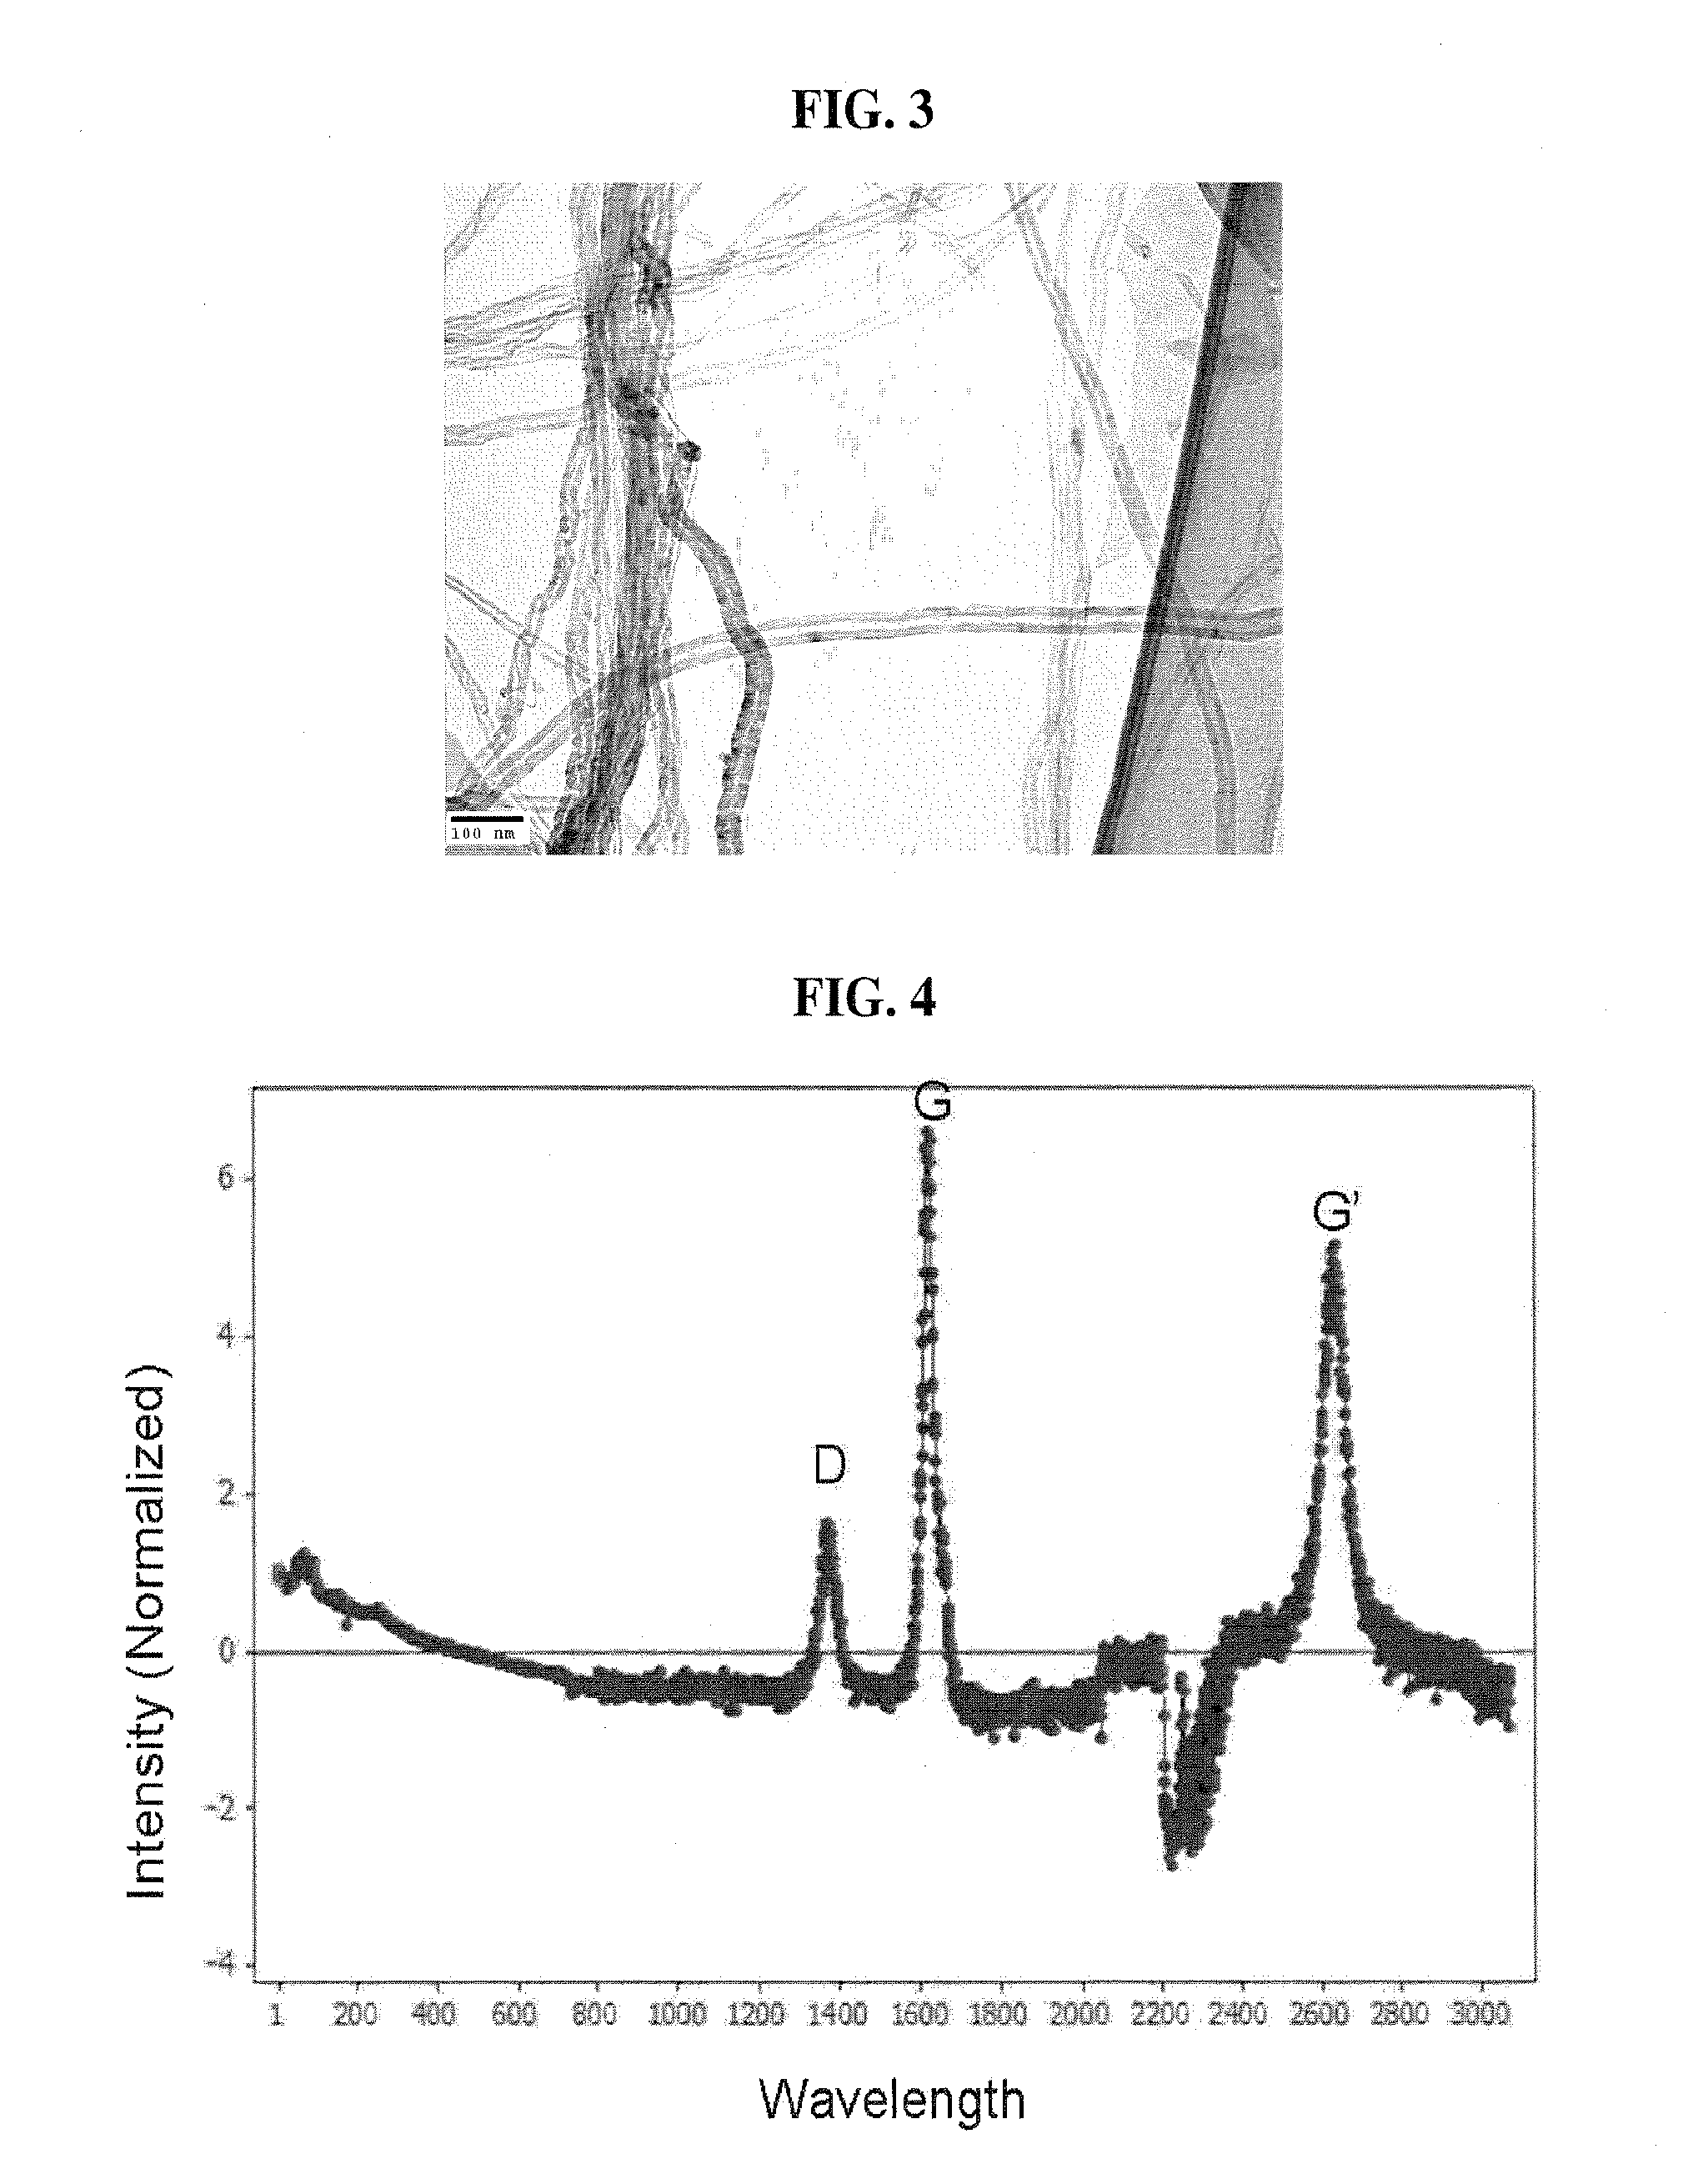 Materials and methods for thermal and electrical conductivity